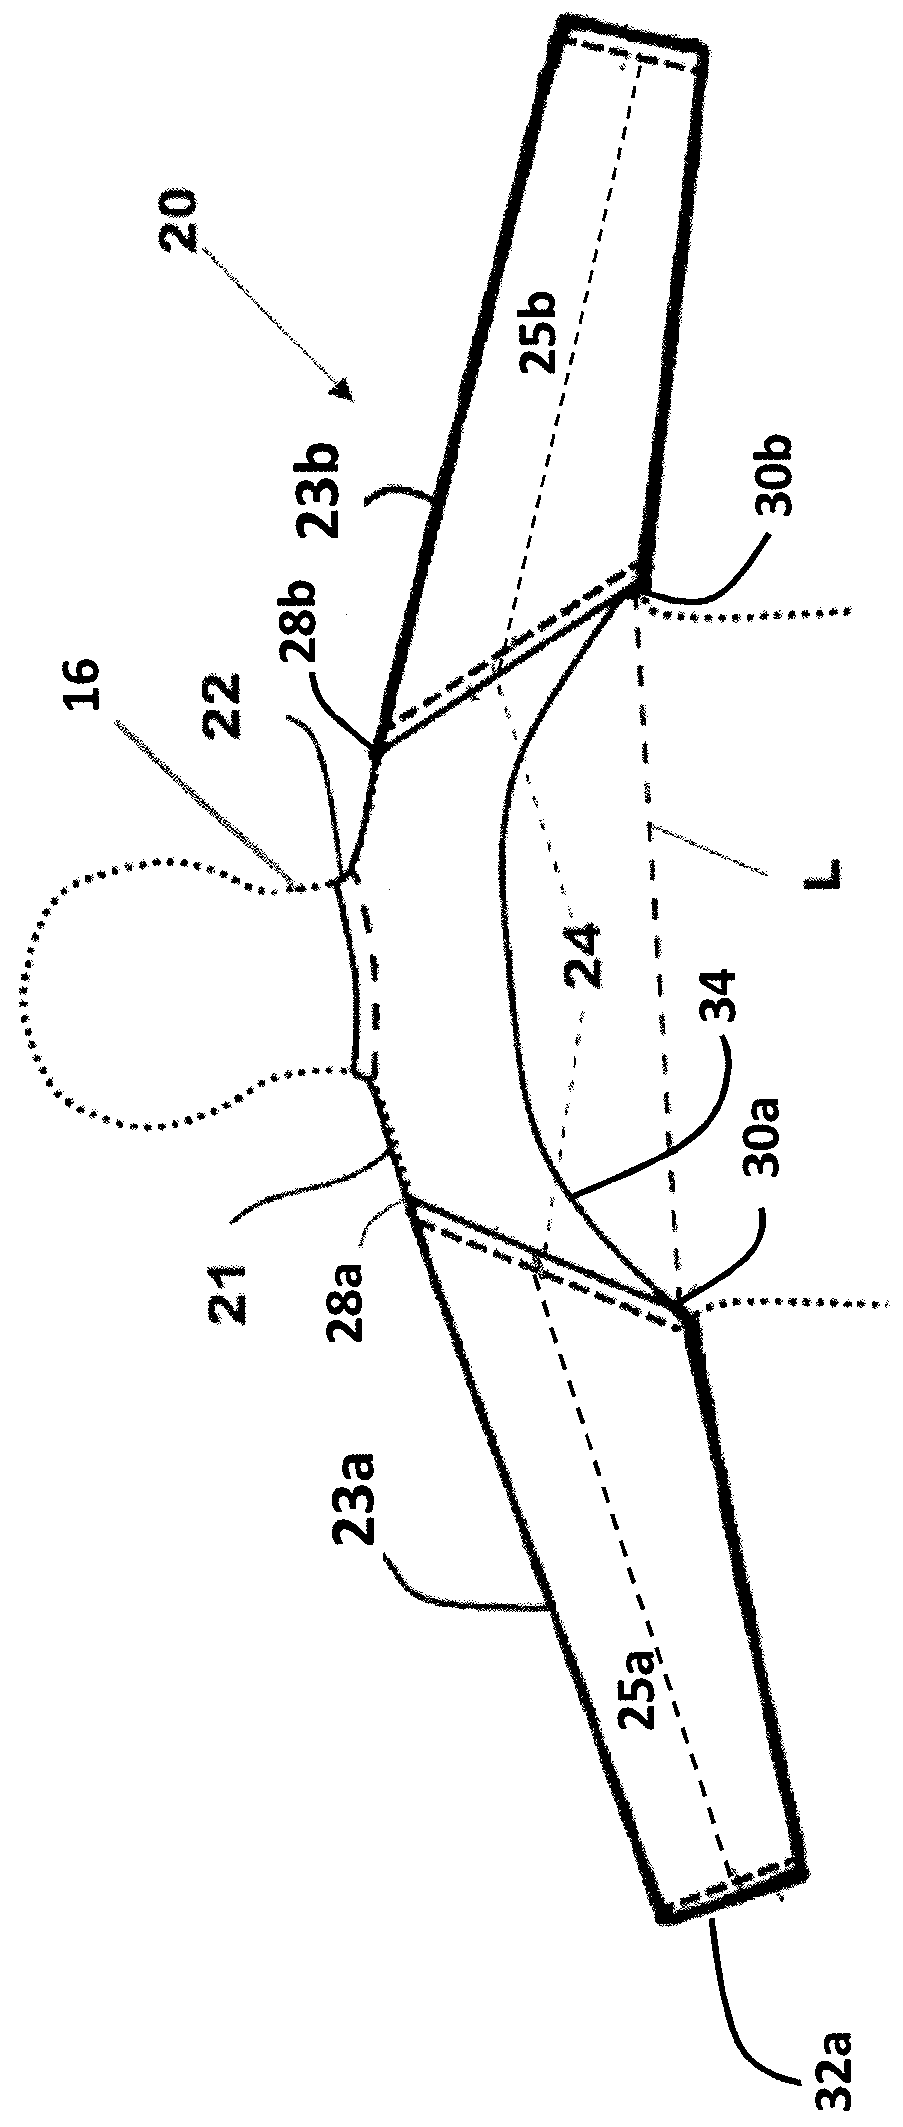 Sleeved partial undergarment and methods of use